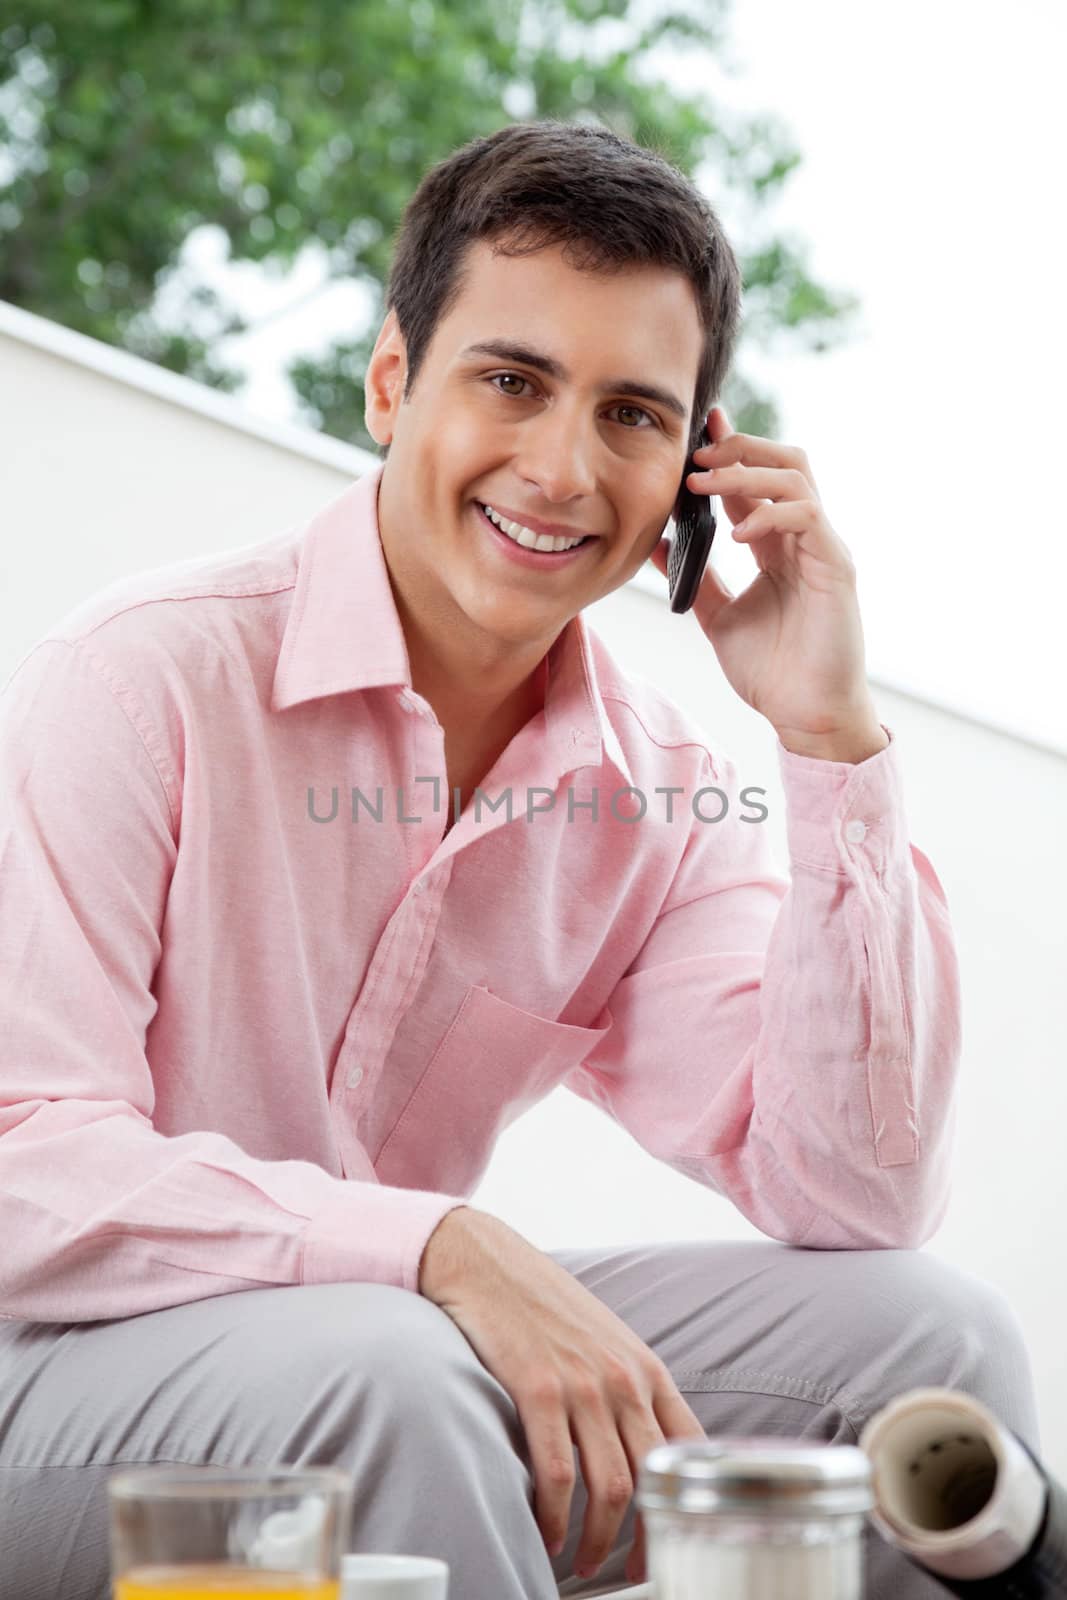 Portrait of male executive smiling while attending phone call